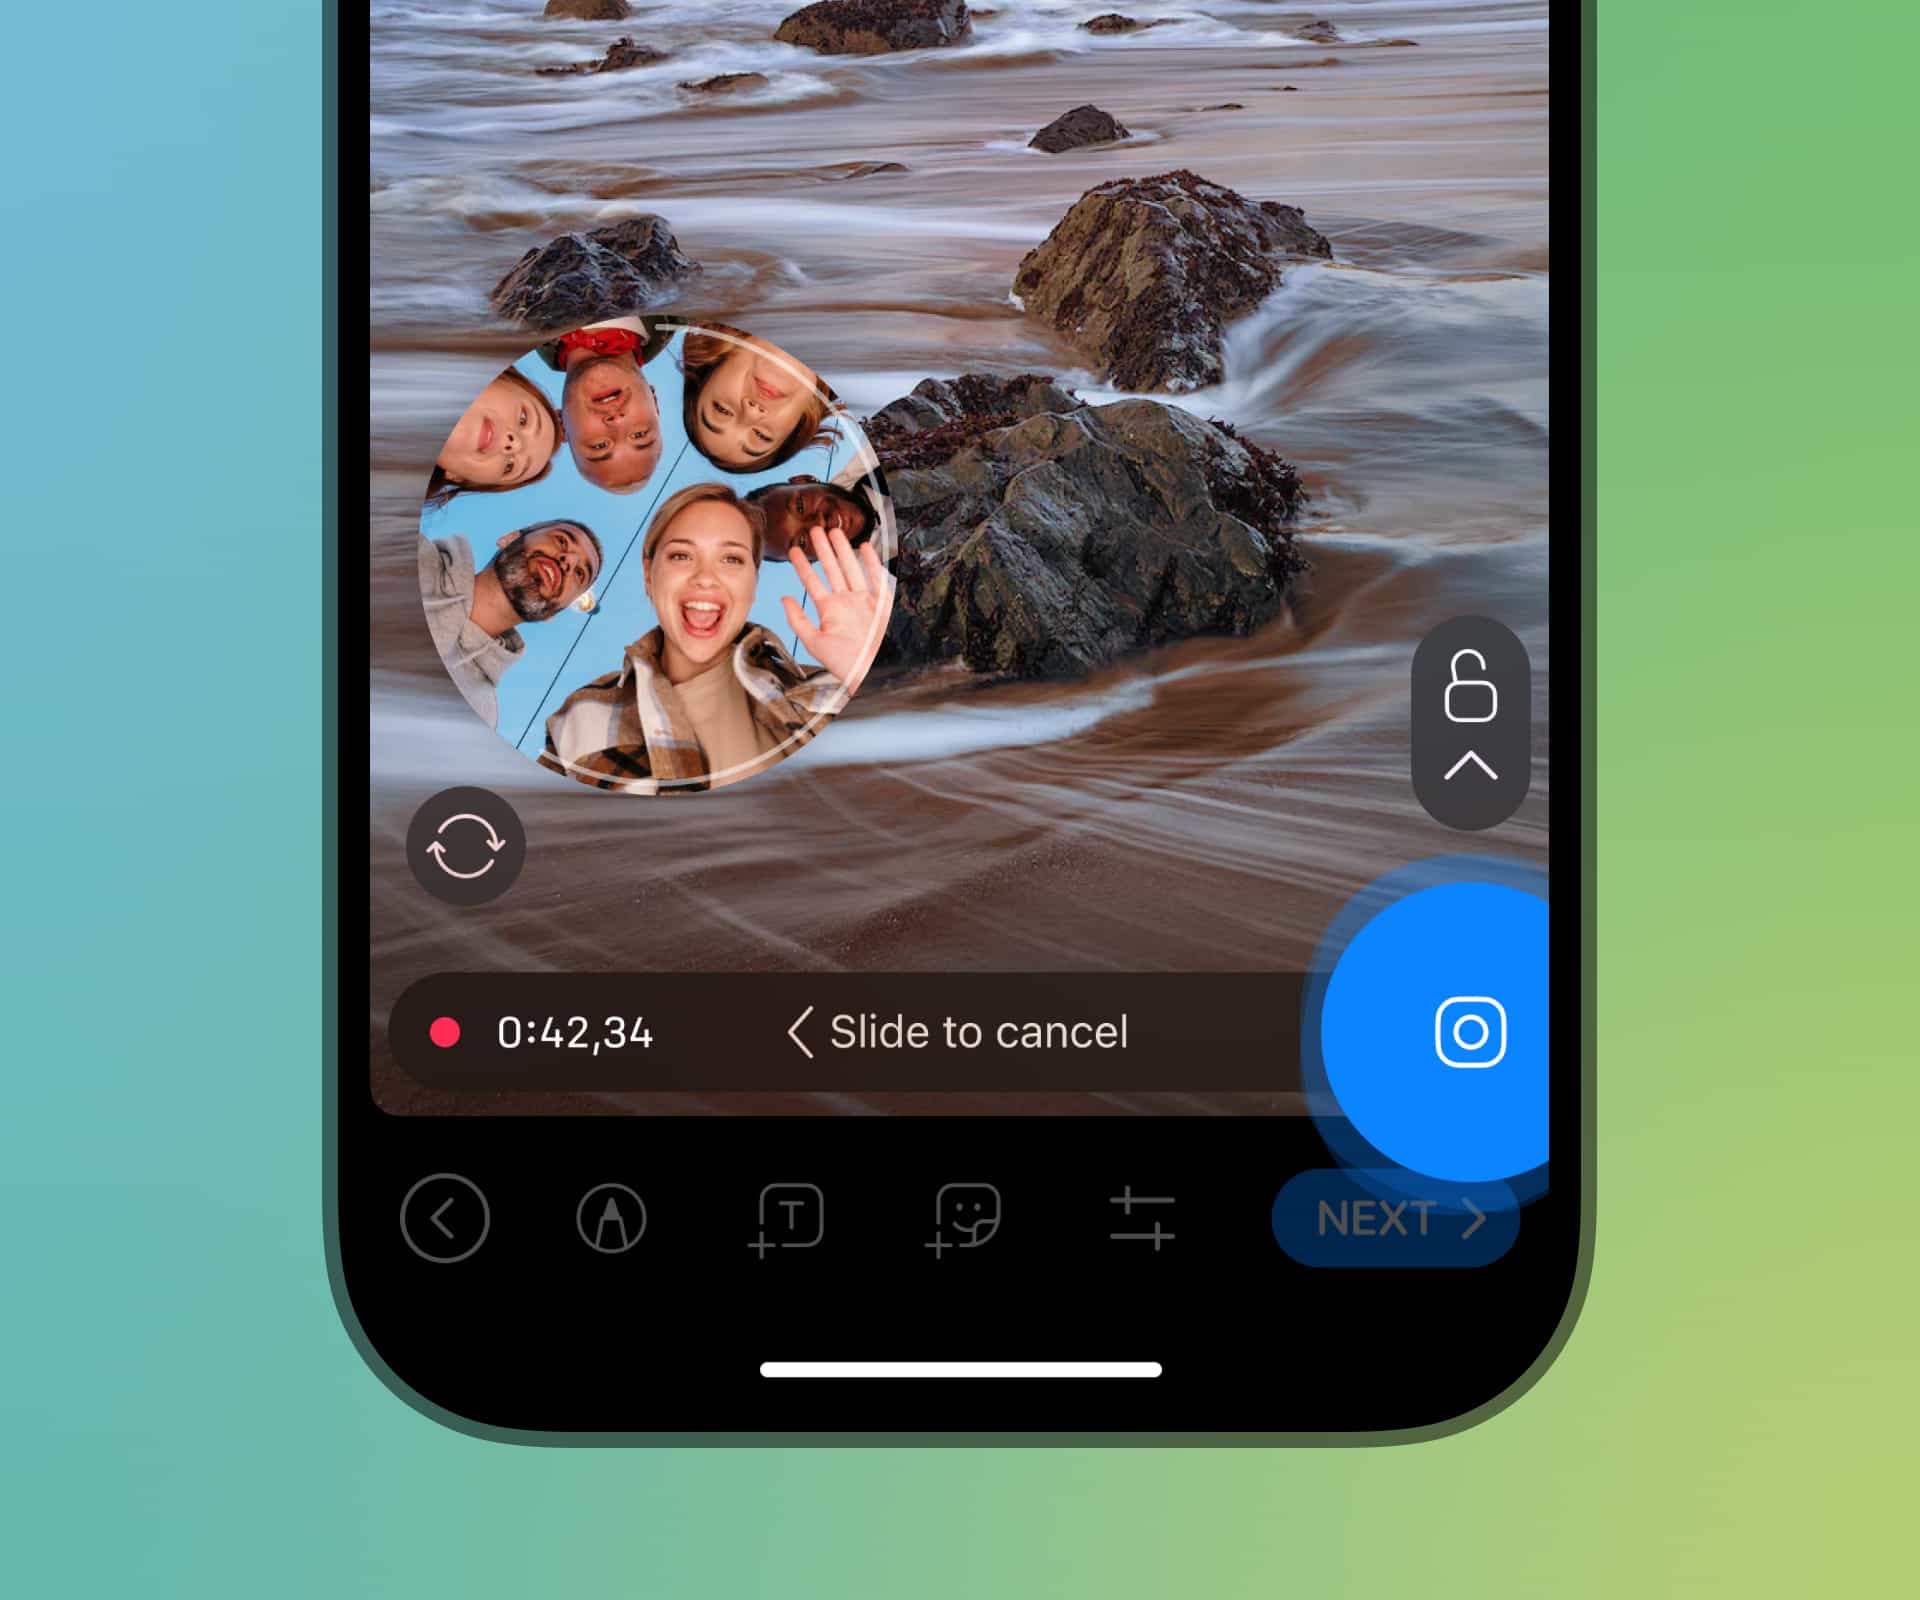 Video Messages on Stories